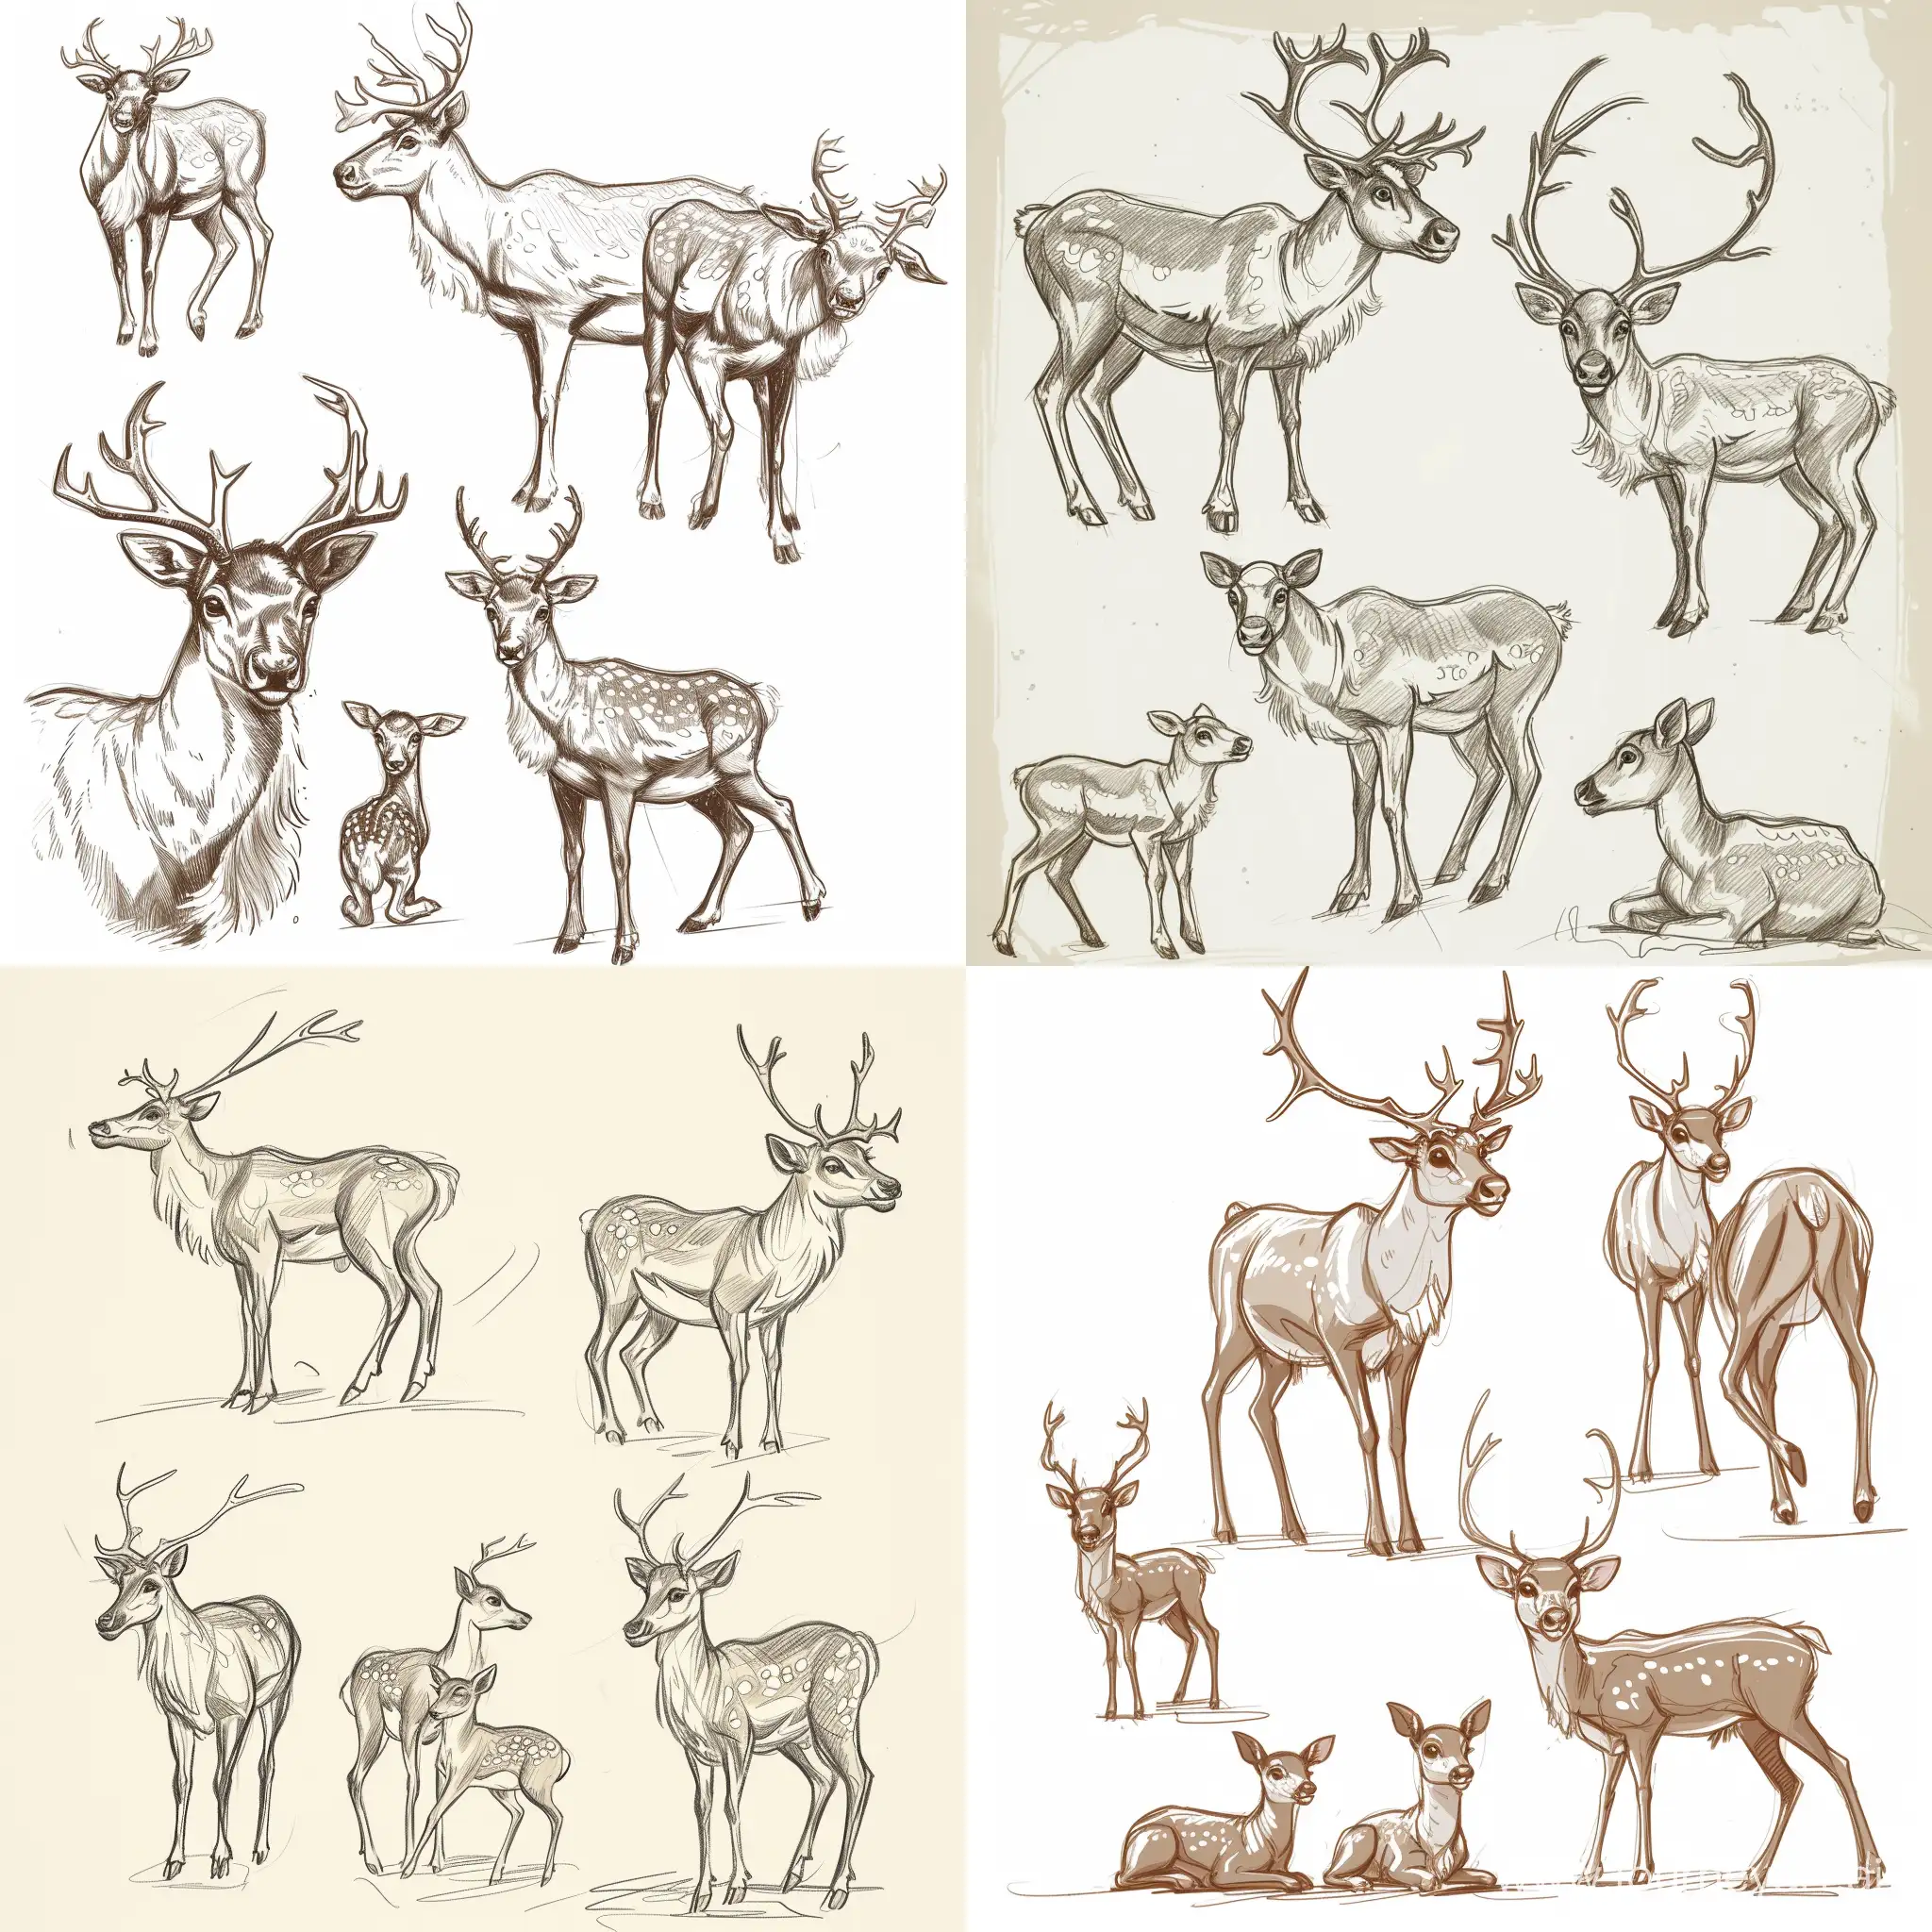 Draw five reindeer and two fawns in different poses in sketchbook sketch style, quick sketch style